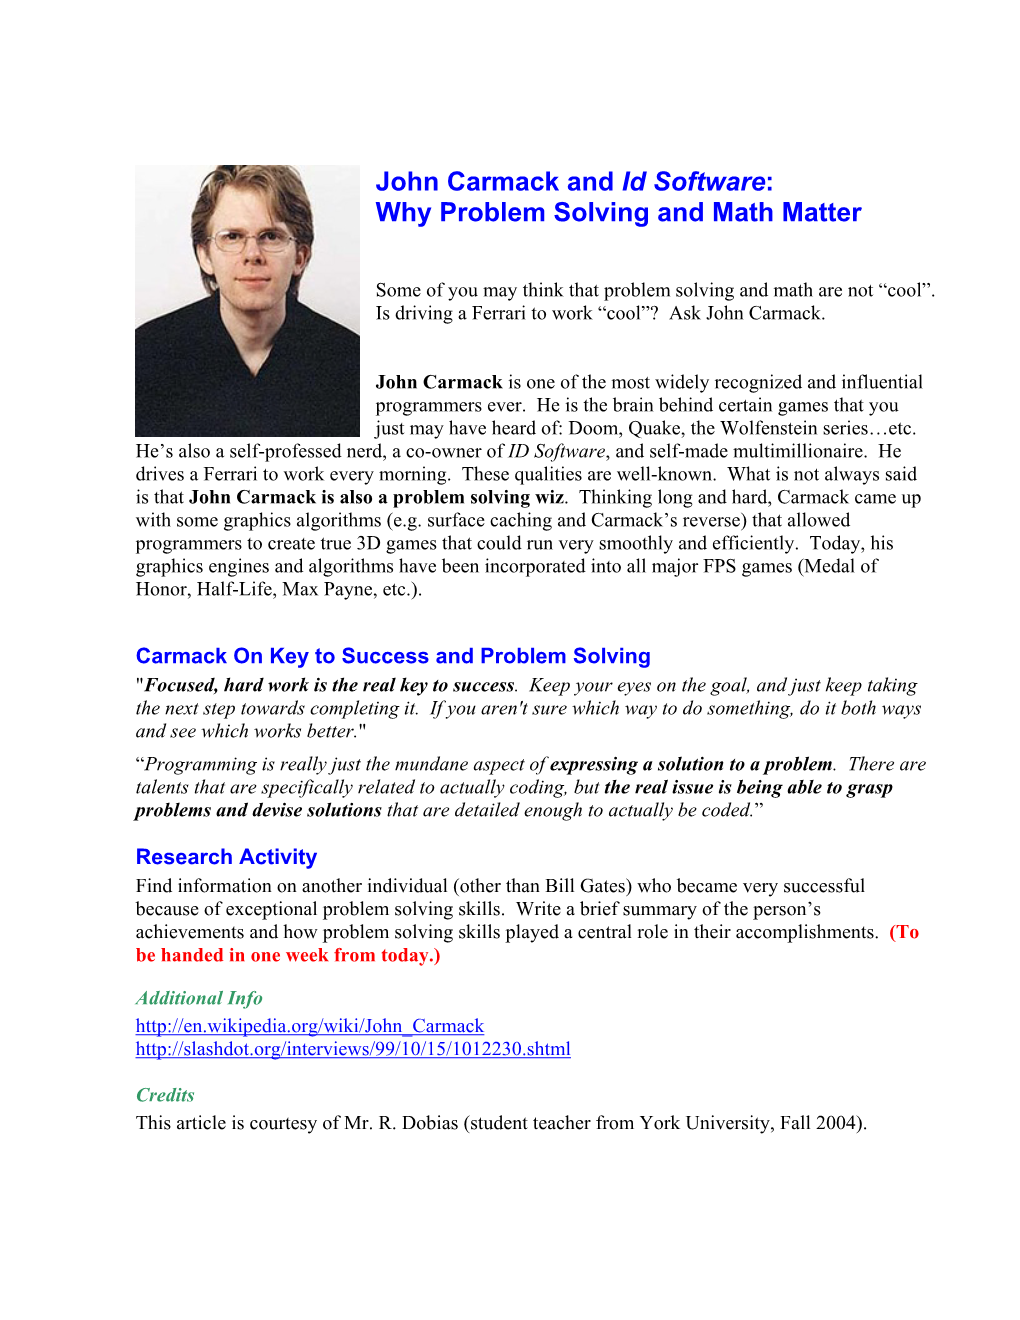 John Carmack and Id Software: Why Problem Solving and Math Matter